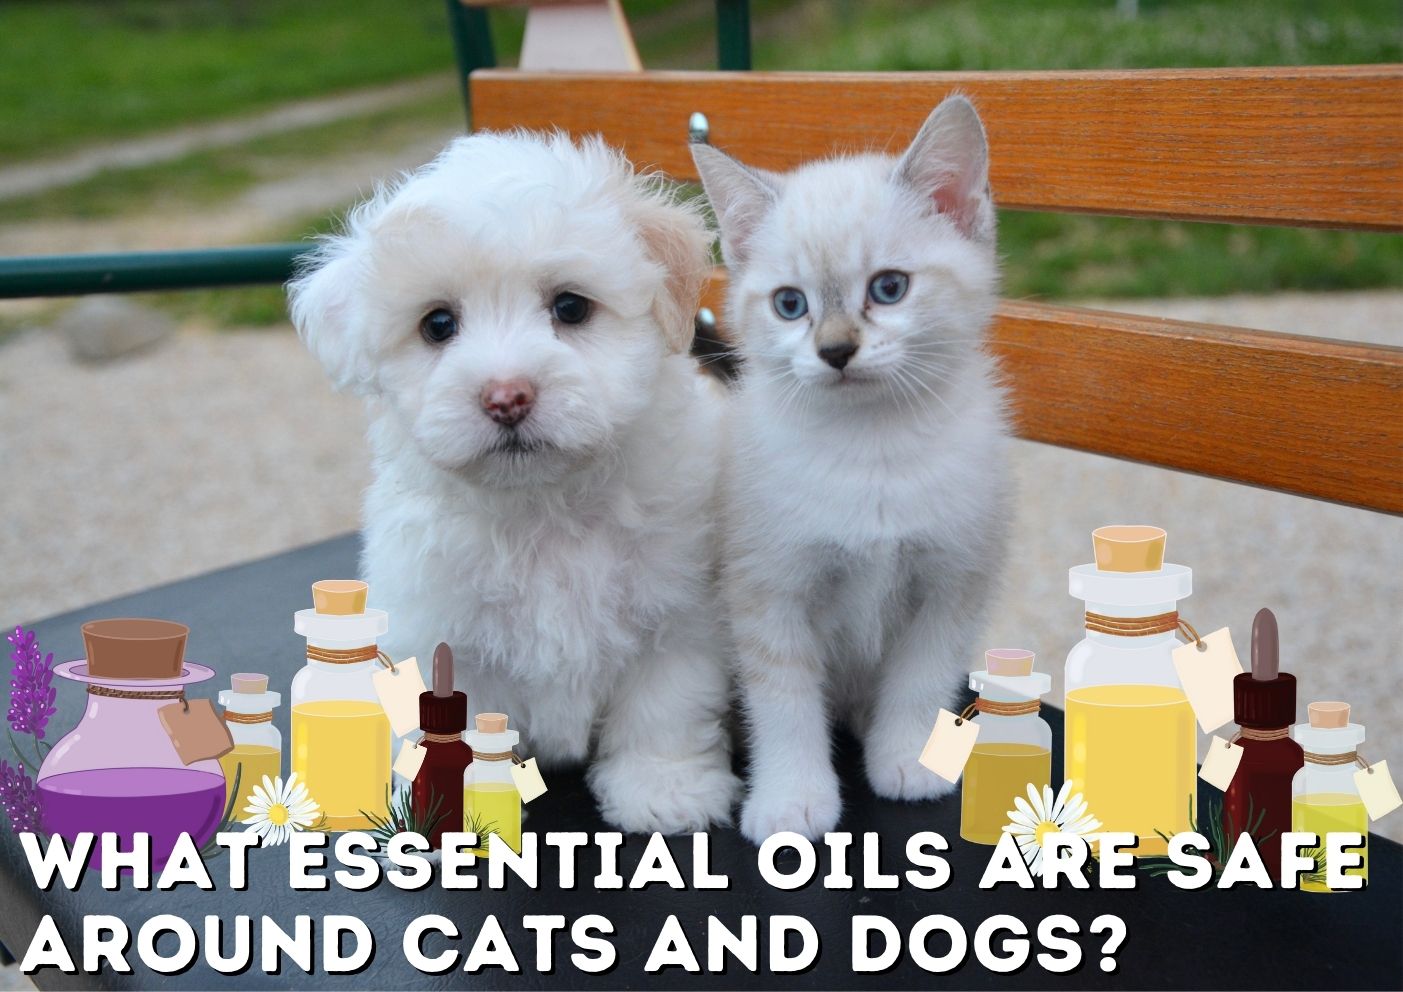 What essential oils are safe around cats and dogs?